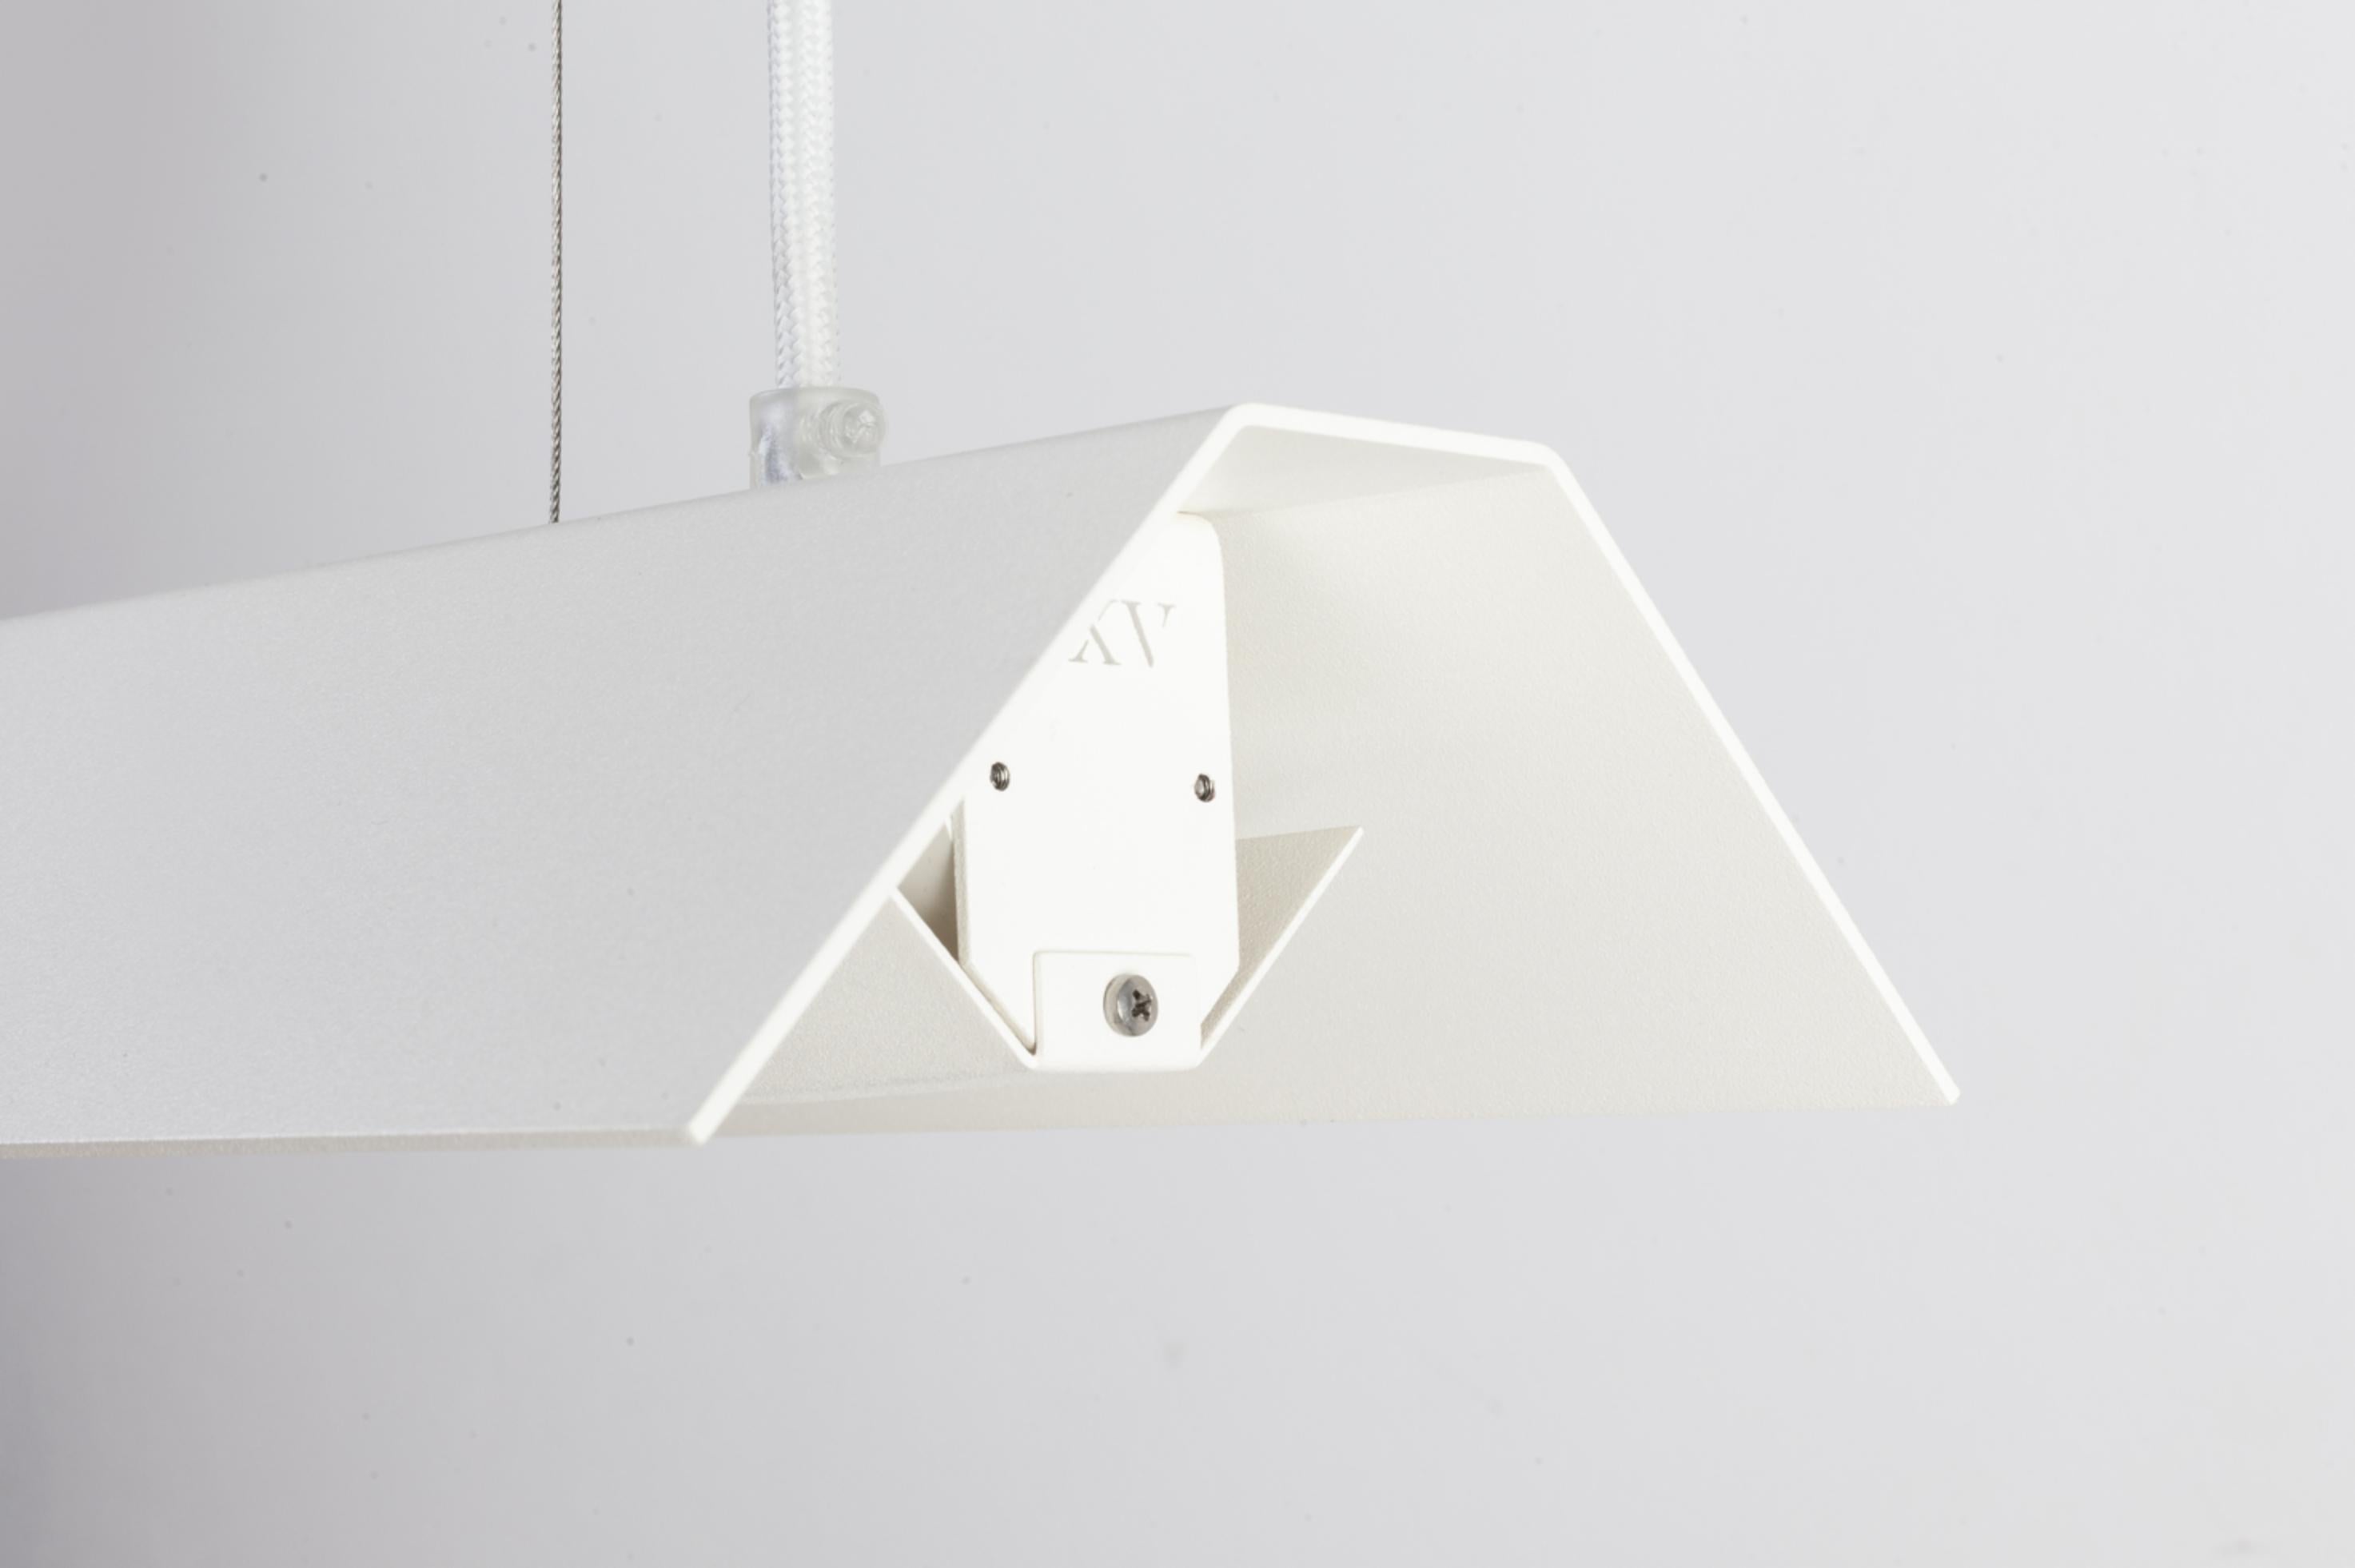 Large Misalliance ral pure white suspended light by Lexavala
Dimensions: D 16 x W 130 x H 8 cm
Materials: powder coated aluminium.

There are two lenghts of socket covers, extending over the LED. Two short are to be found in Suspended and